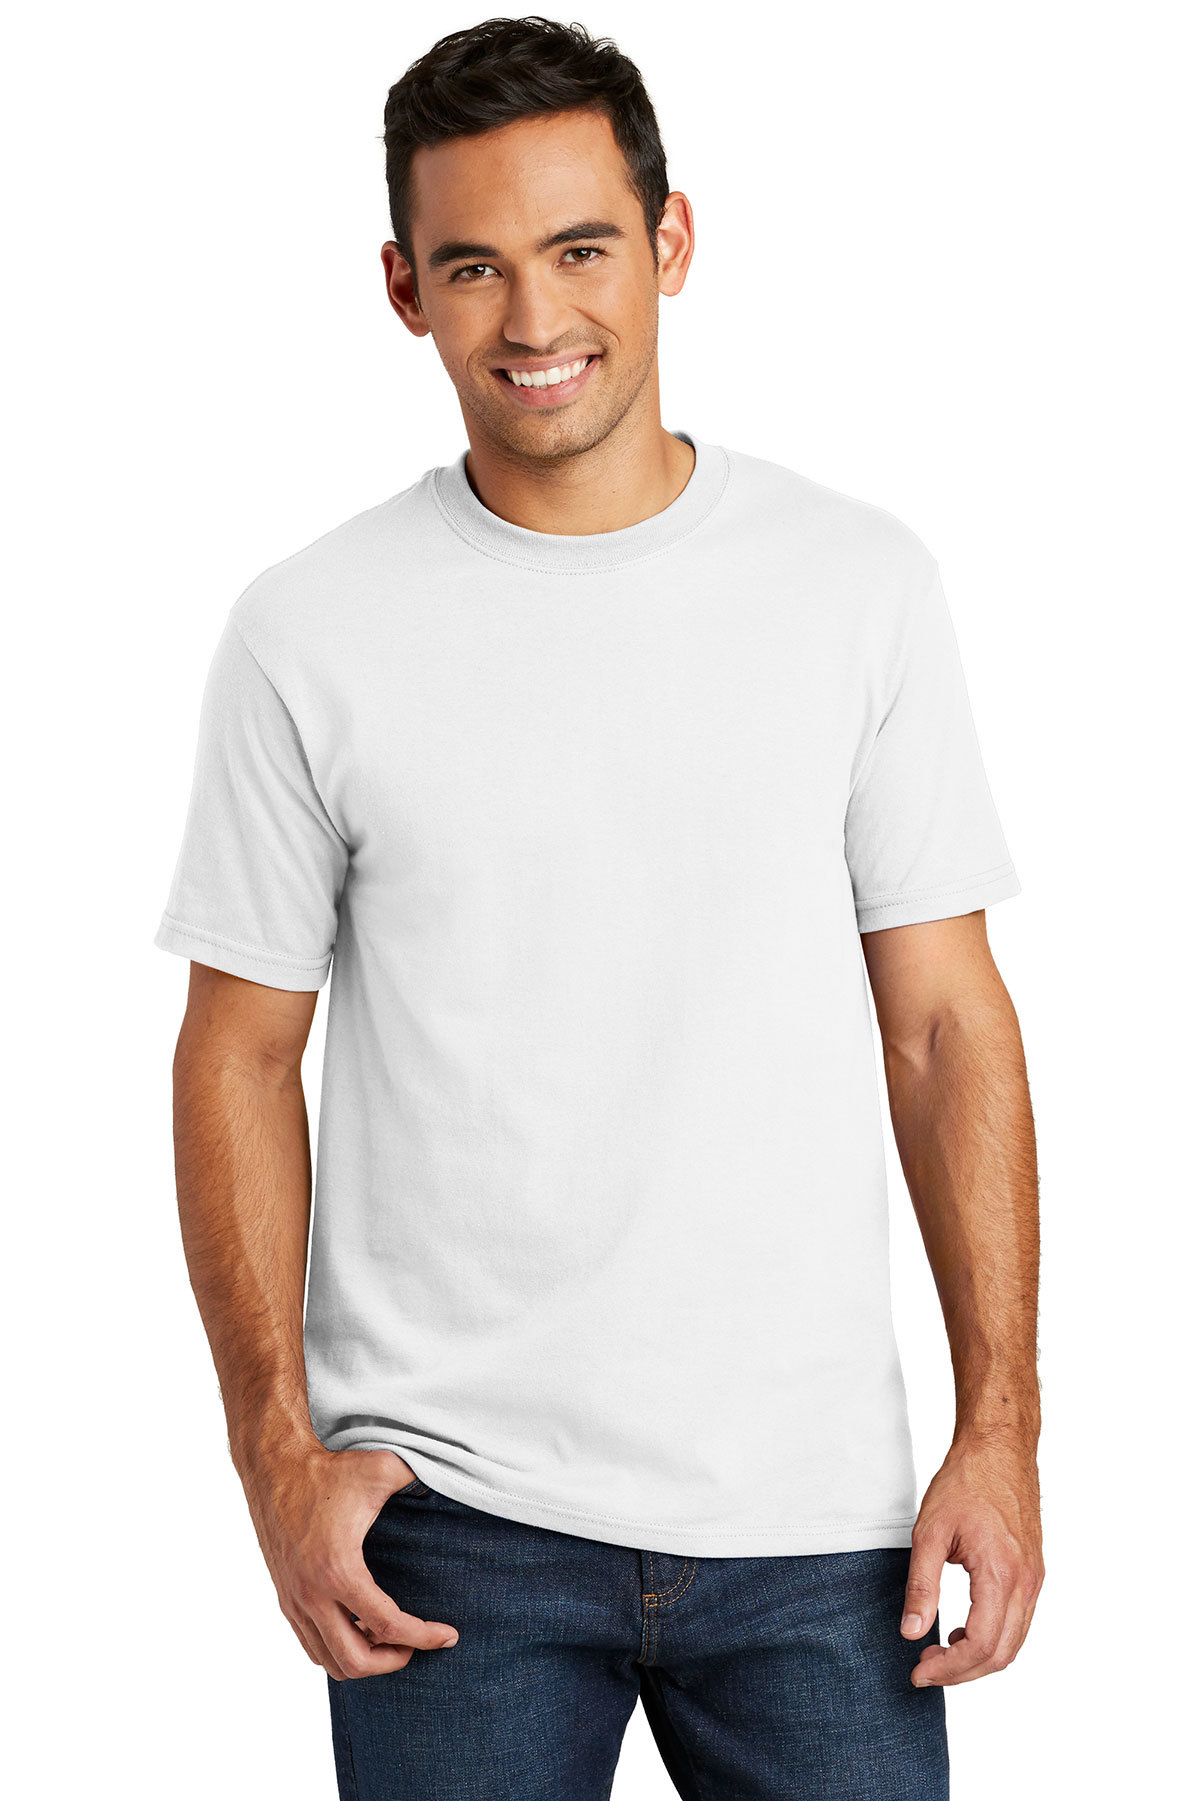 Port & Company All-American Tee, Product